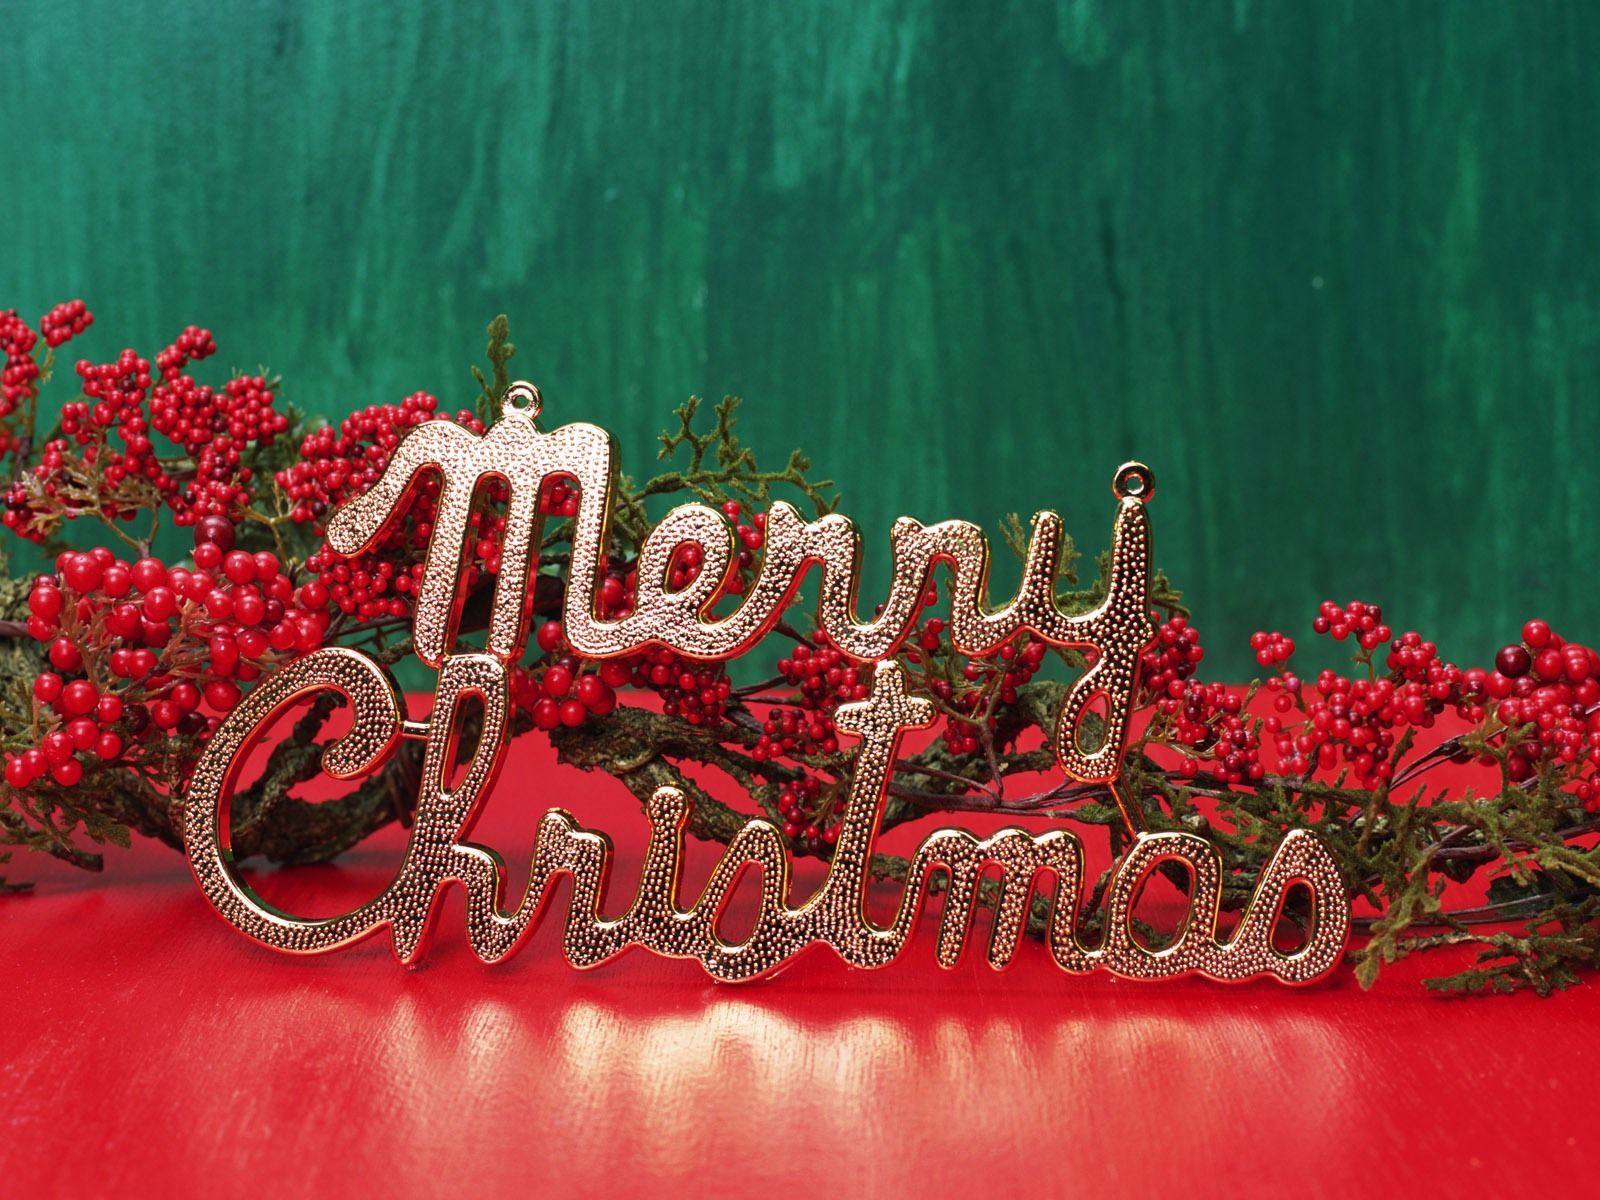 2015 merry Christmas backgrounds desktop - wallpapers, images ...